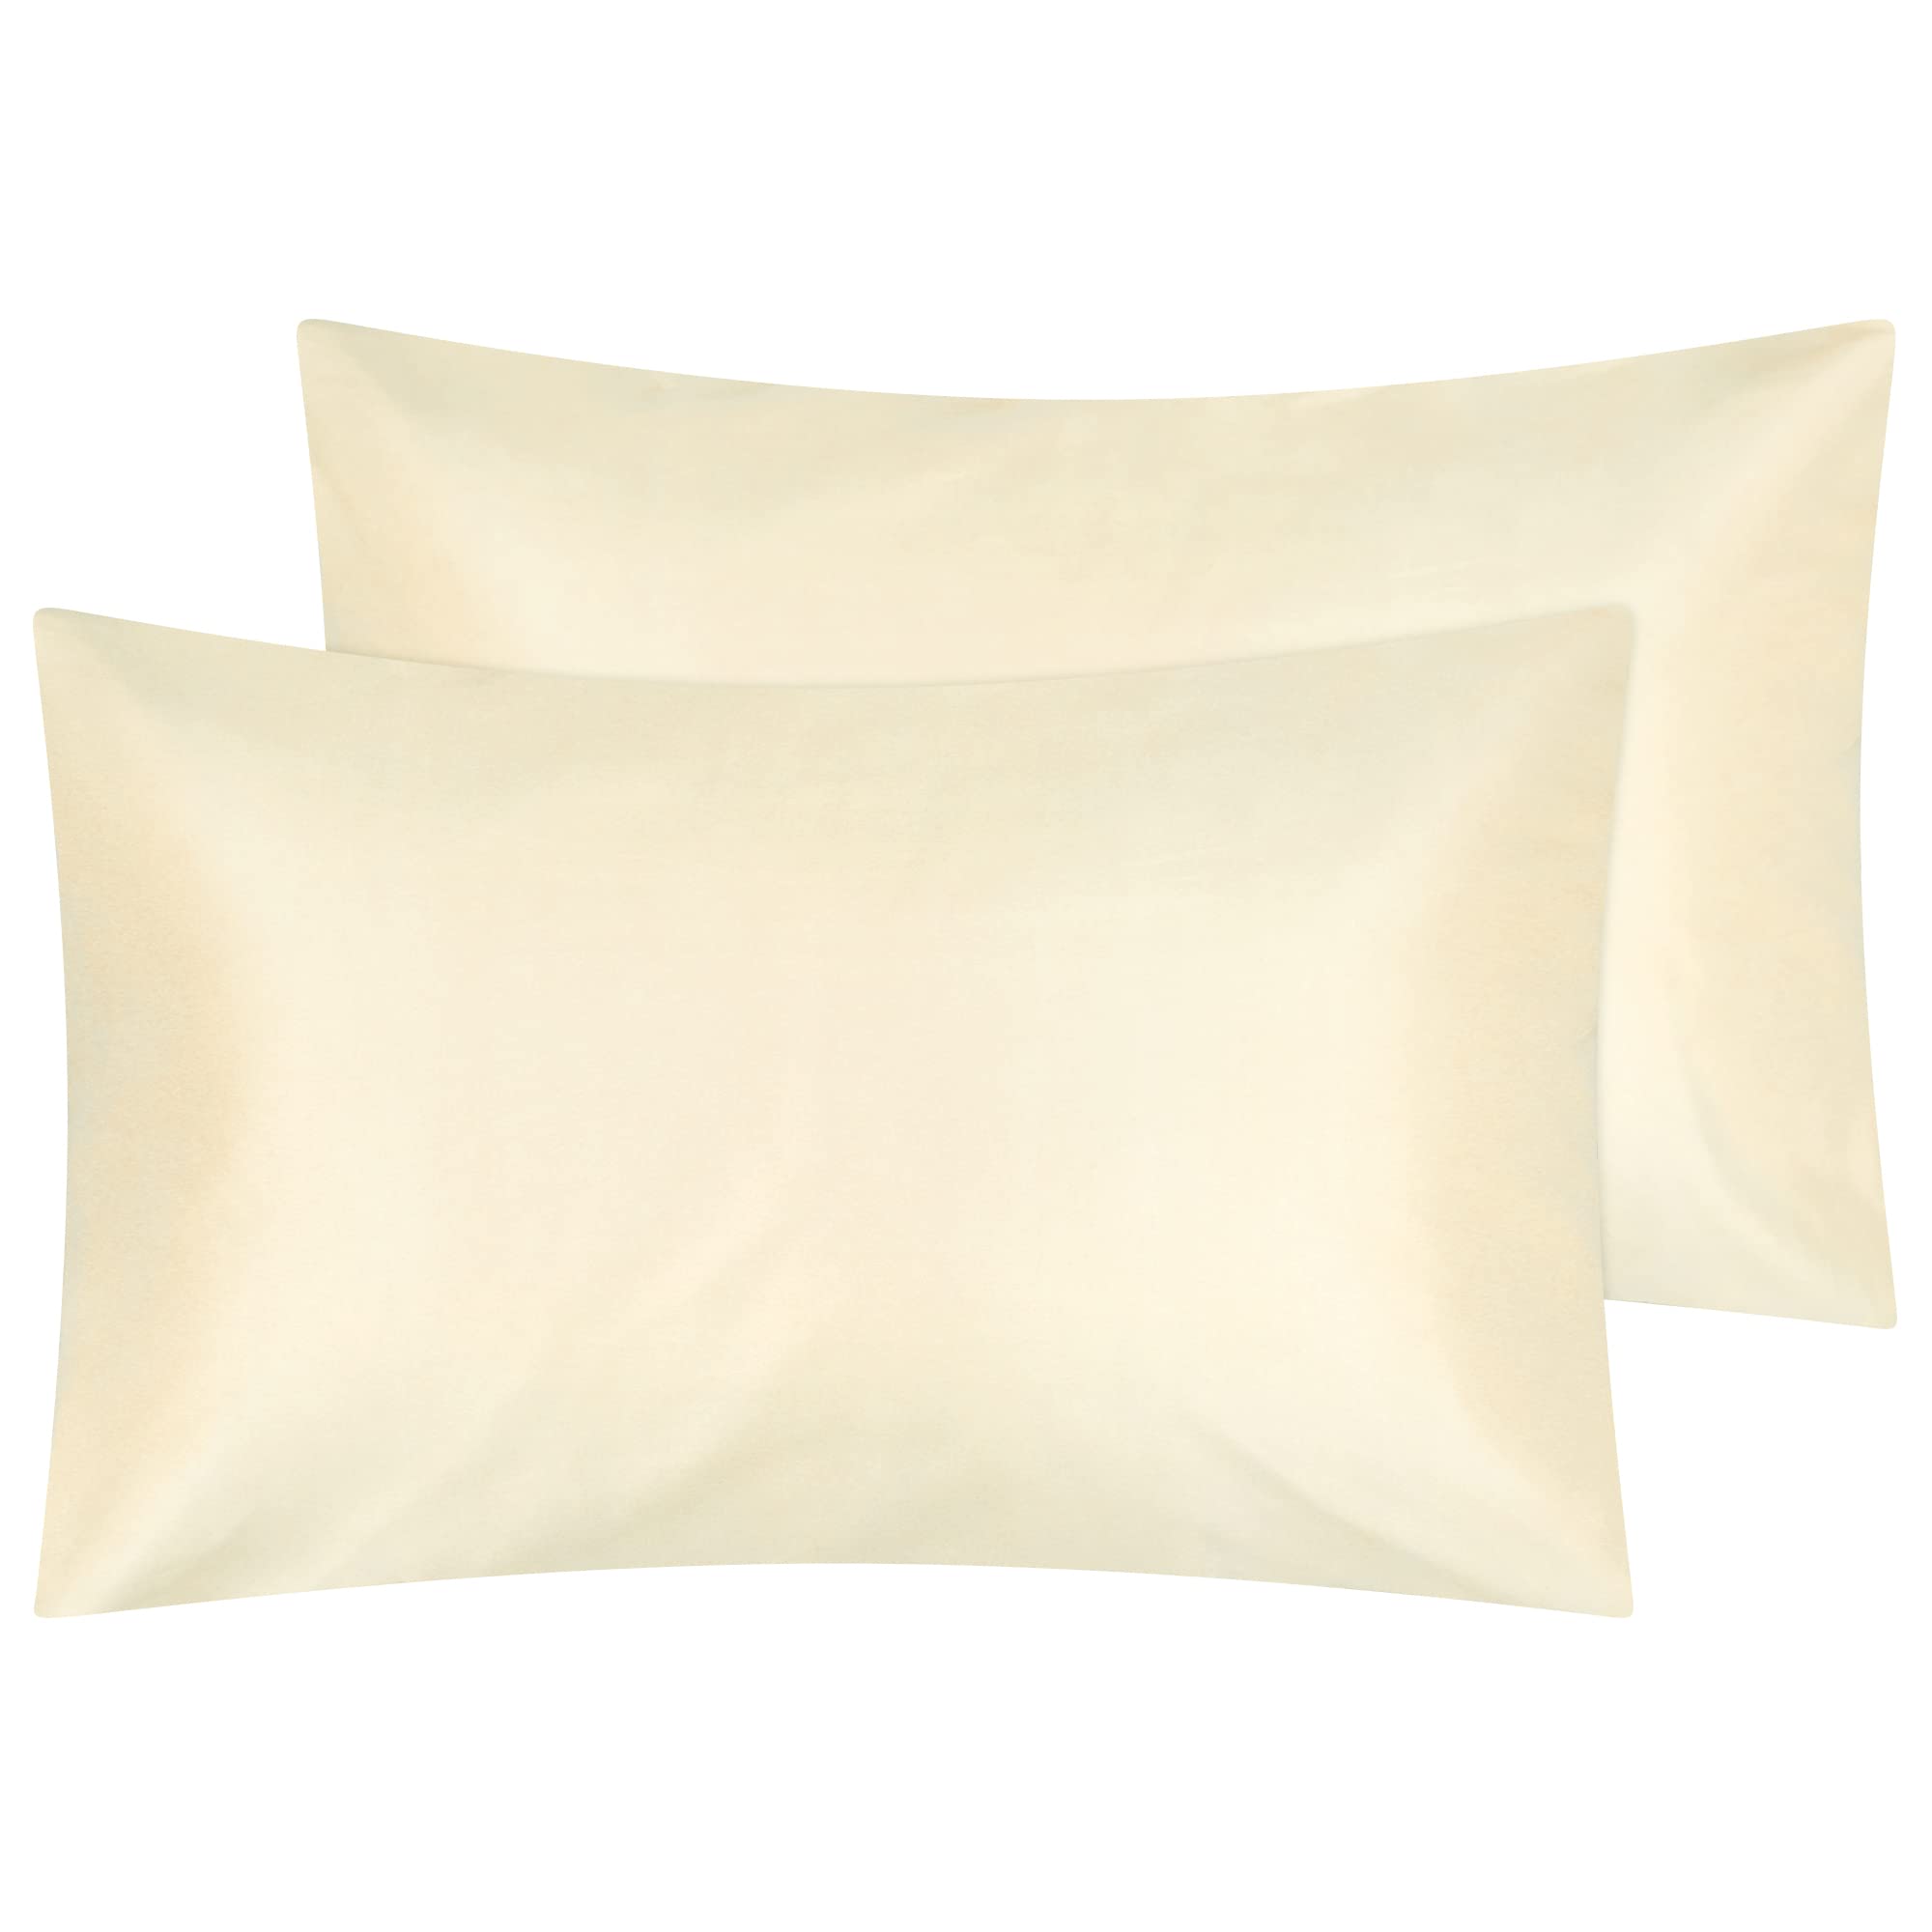 CHELUXS Brushed Microfibre Super Soft Touch Pillowcases Pack of 2 Cozy Standard Pillow Cases with Envelope Closure - Breathable, Stain and Wrinkle Resistant Pillow Covers 50 x 75 cm (Beige)